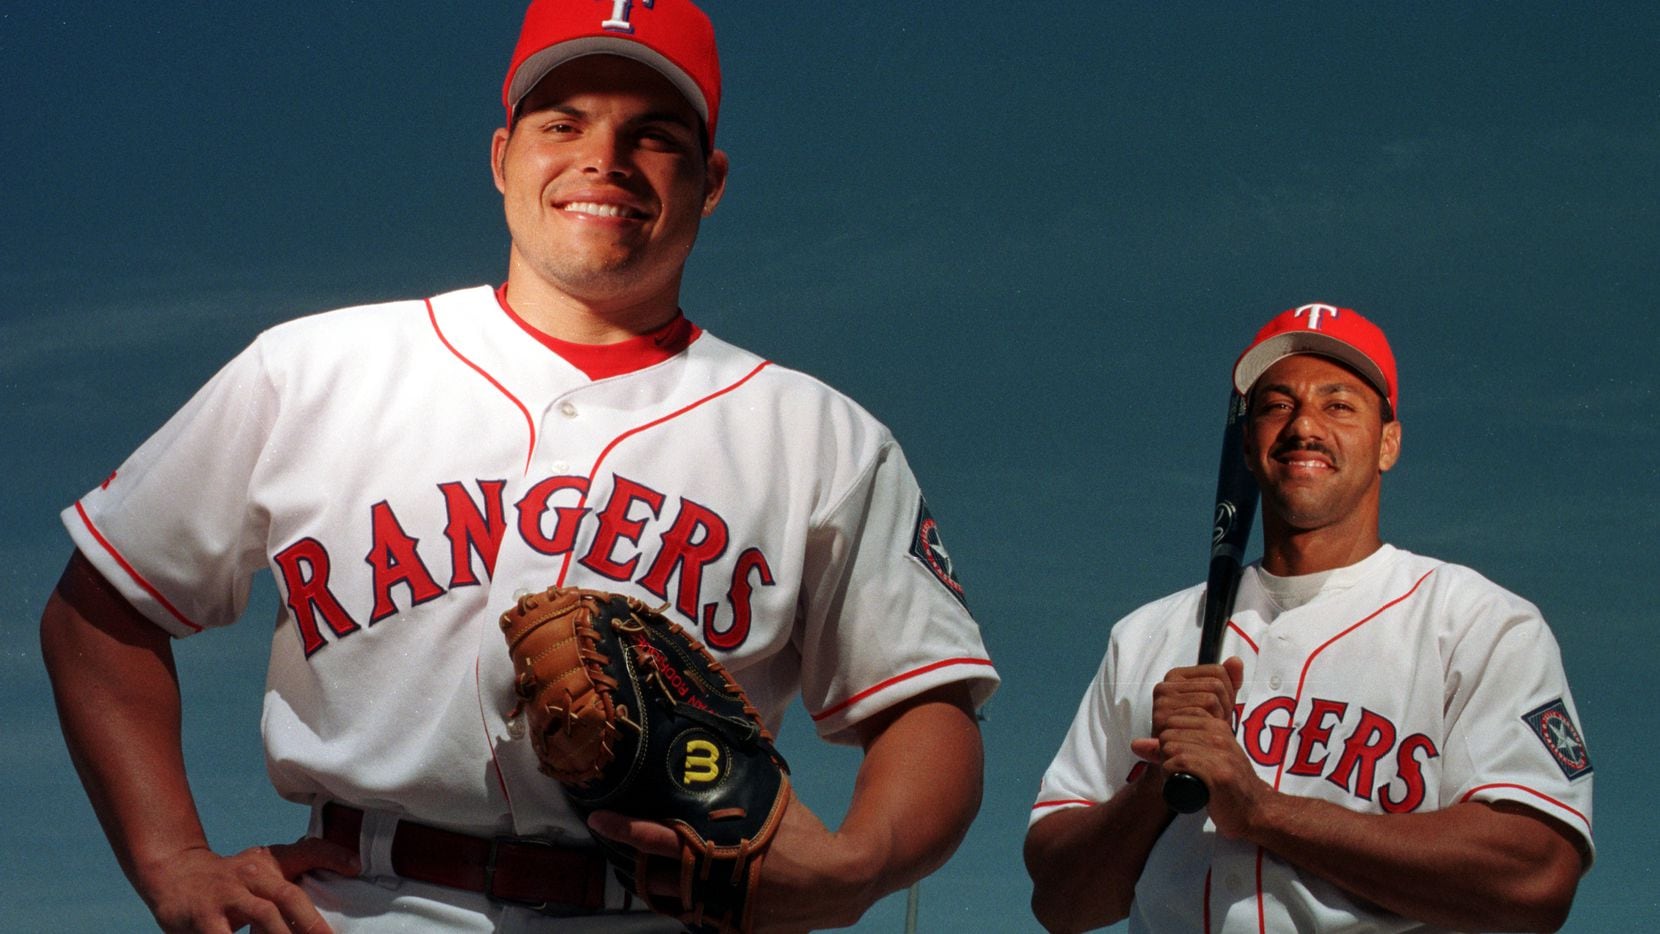 Throughout the Texas Rangers' history, some exceptional baseball players have come through...